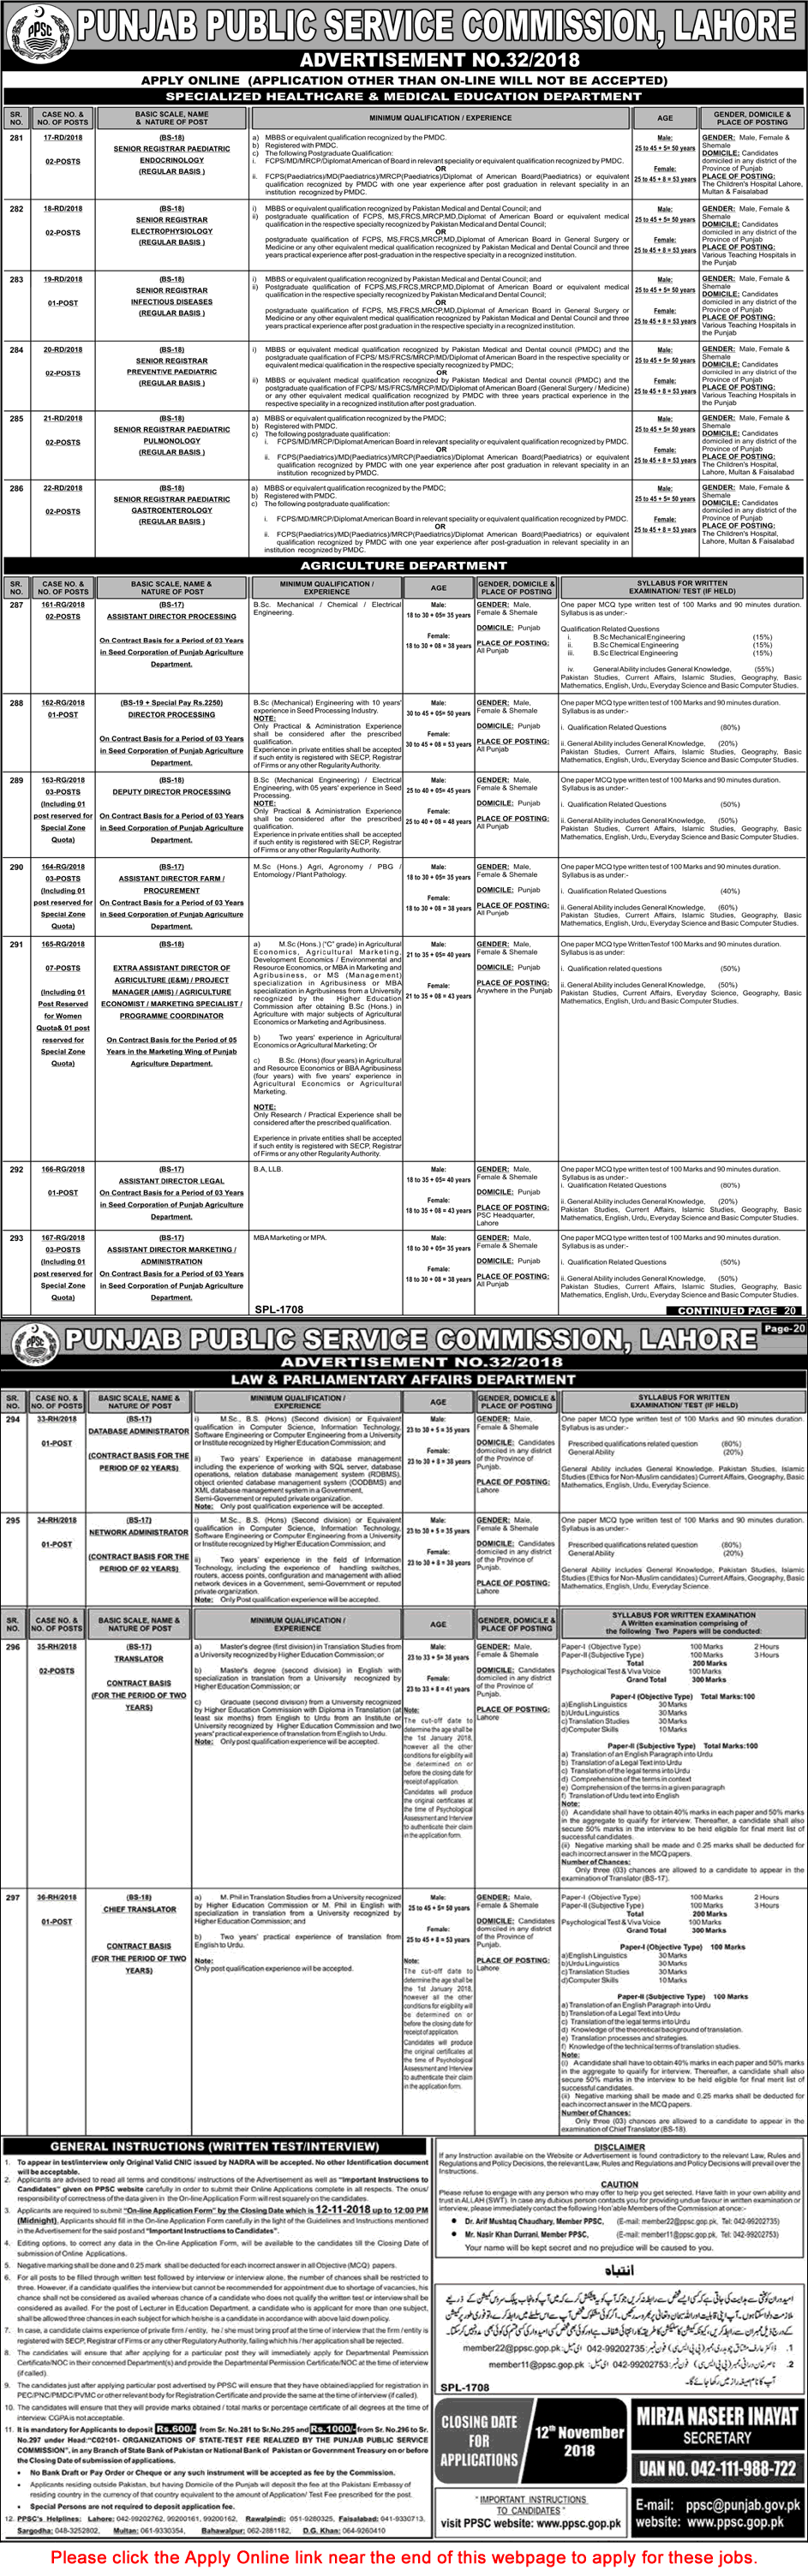 PPSC Jobs October 2018 November Apply Online Consolidated Advertisement No 32/2018 Latest